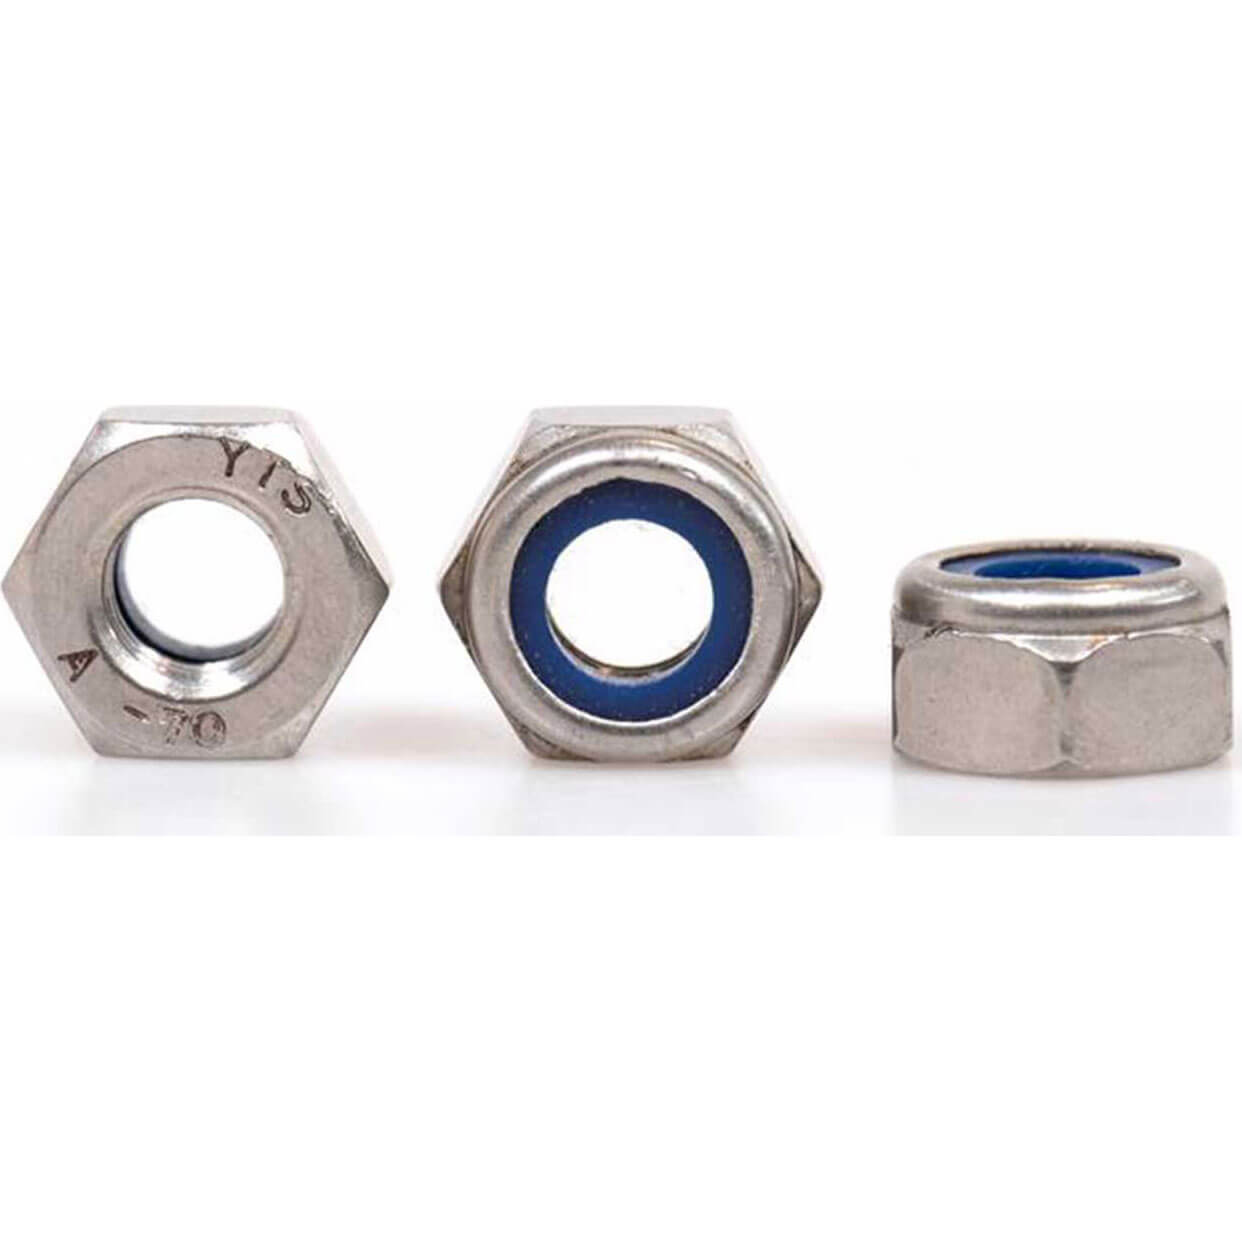 Image of Sirius A4 316 Stainless Steel Nyloc Nuts M12